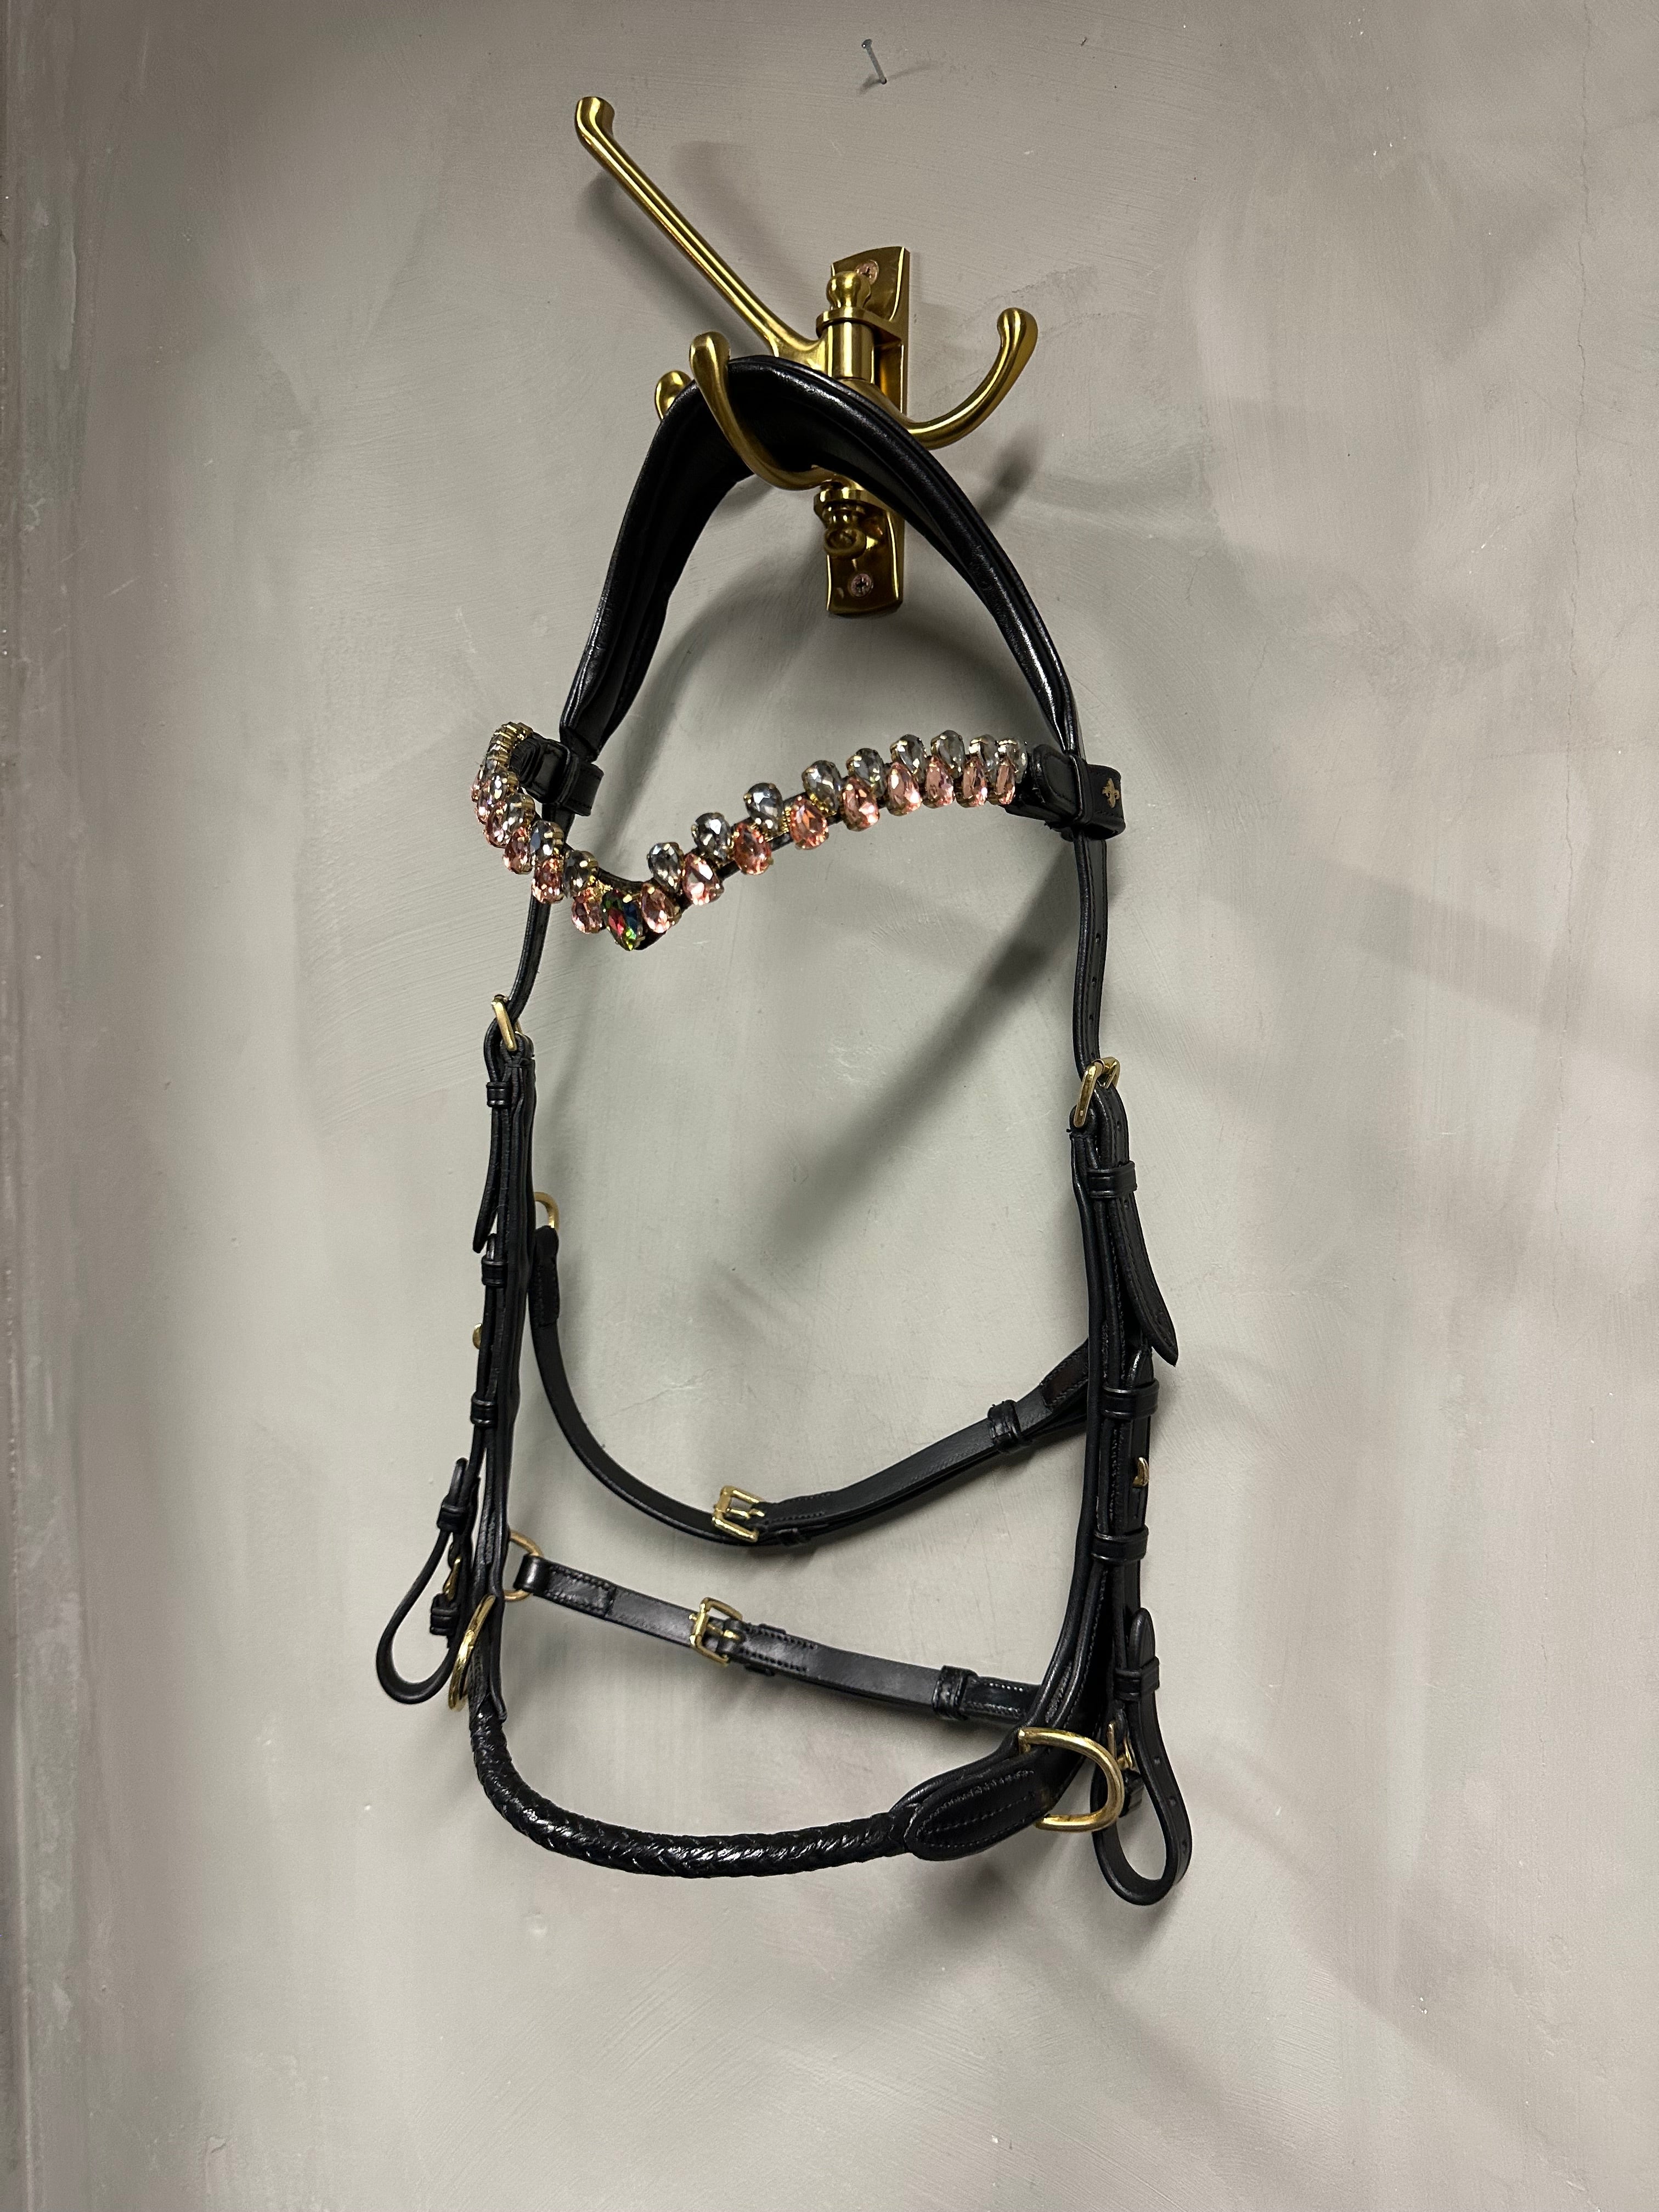 Masego Grace Multi Bit or Bitless Bridle - Italian Leather - Equiluxe Tack